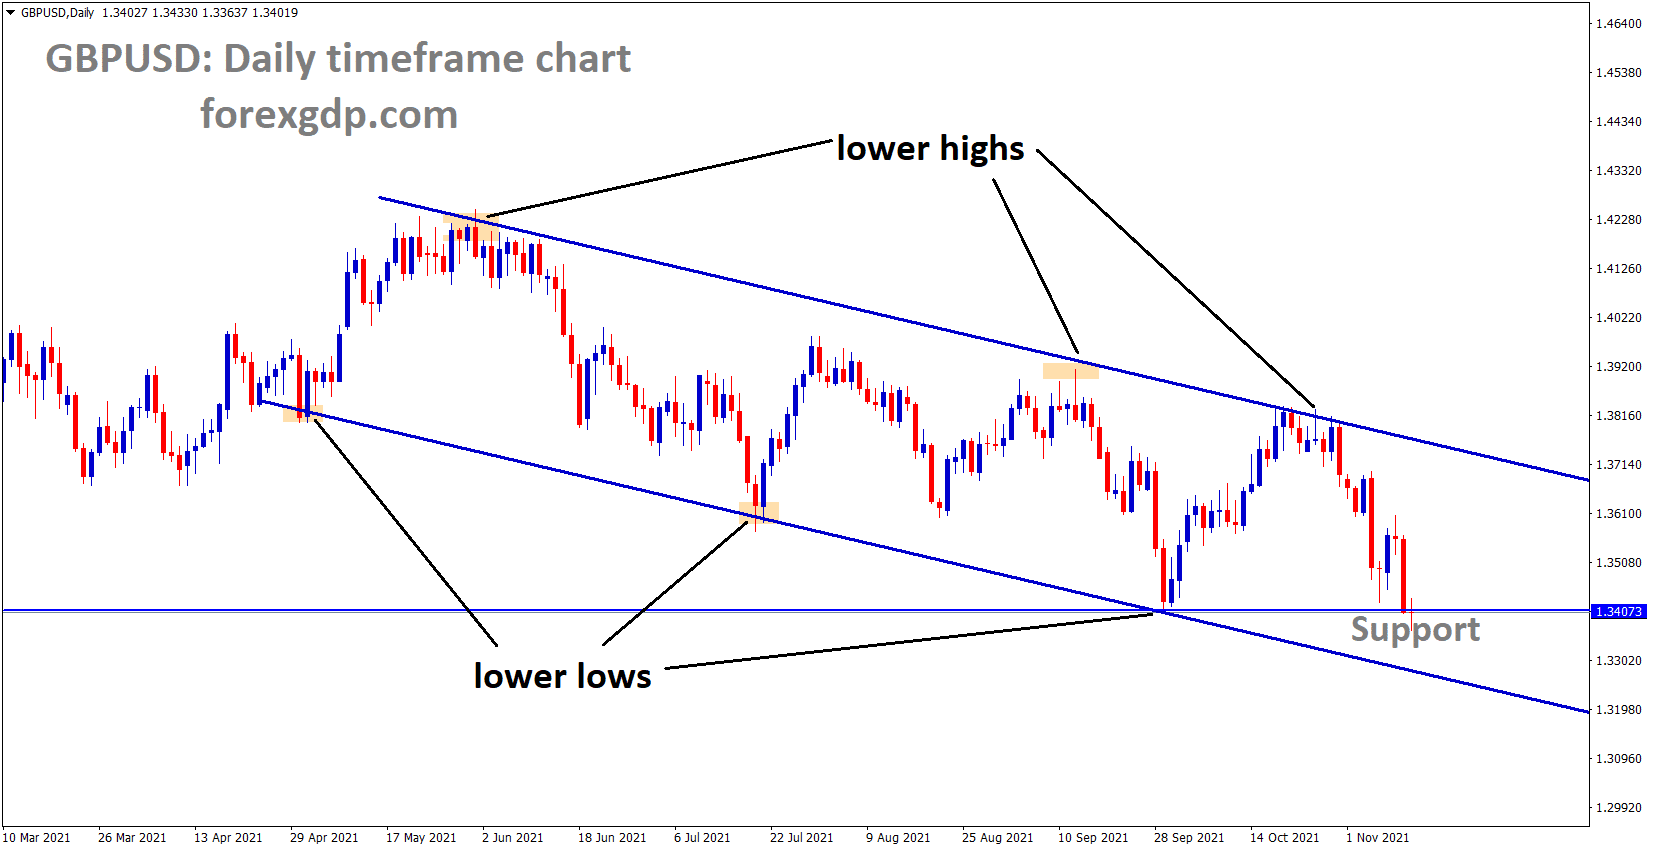 GBPUSD is moving in the Descending channel and the market reached the previous support area